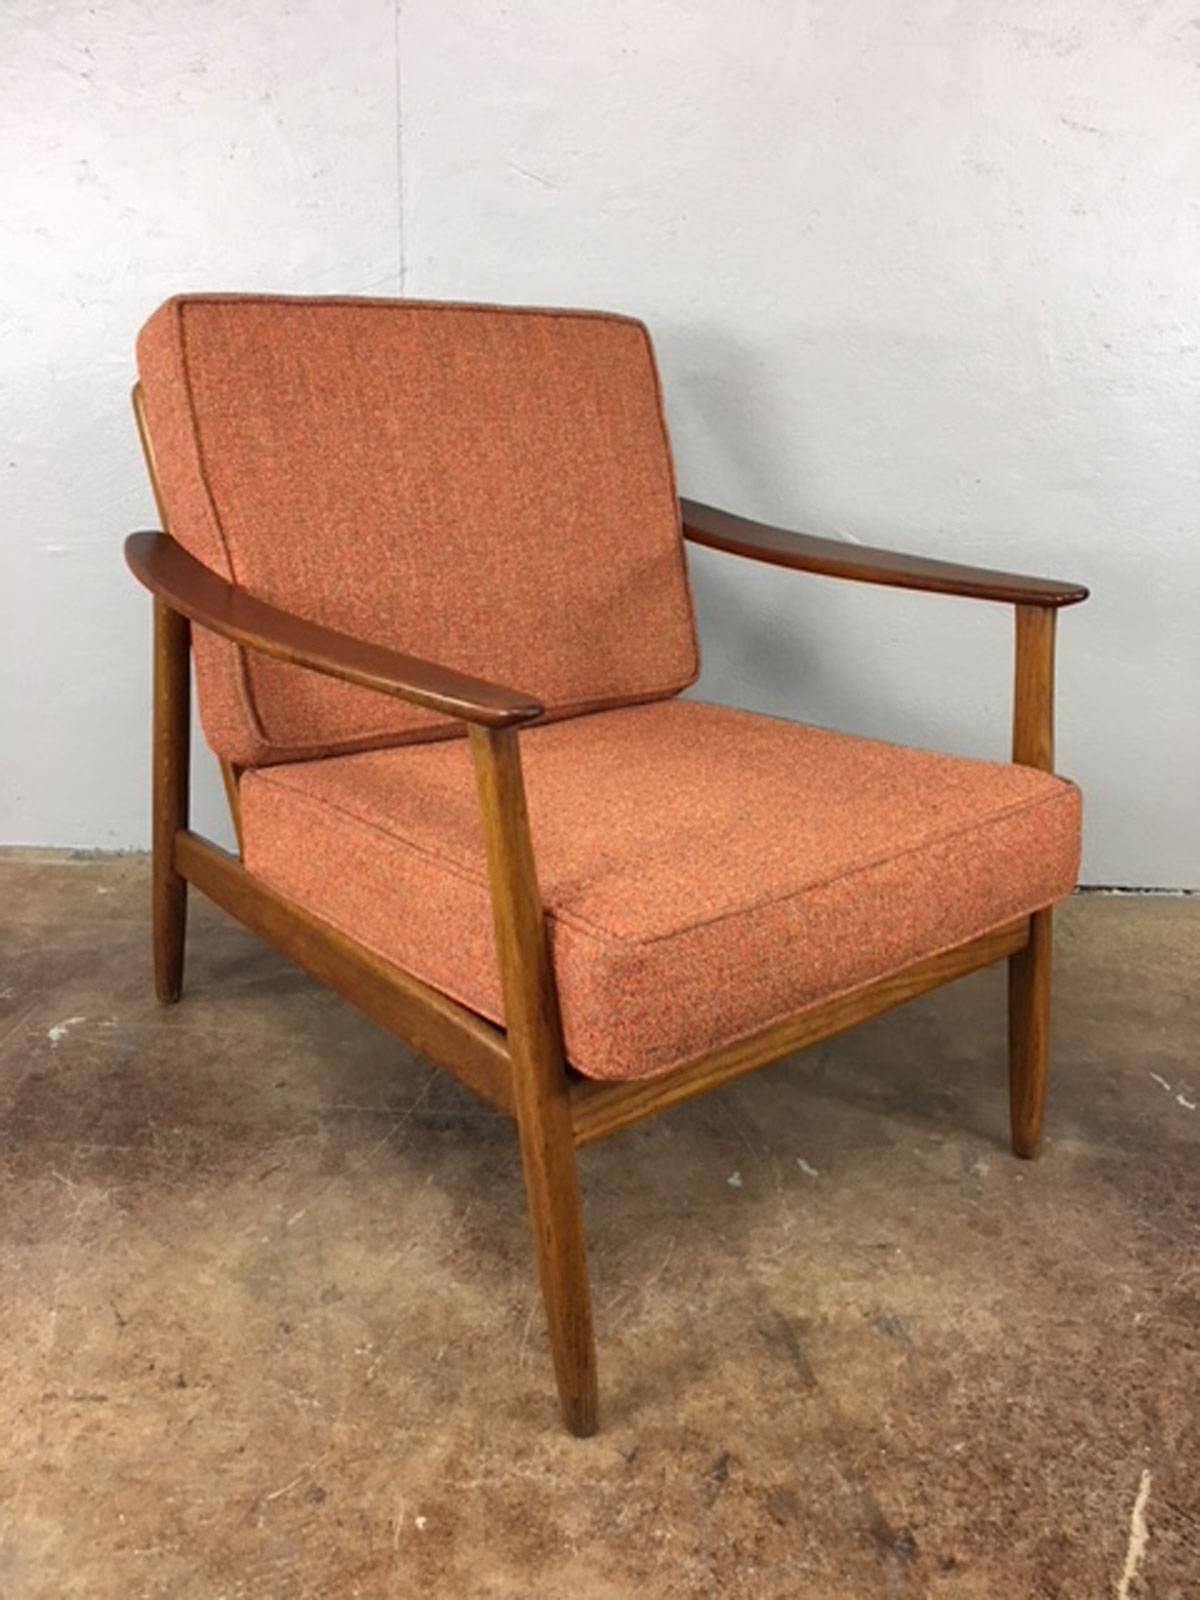 Unique cane back teak lounge chair by DUX. Attributed to Folke Ohlsson. New Upholstery. Original bottom support strapping remains in place and is functional.